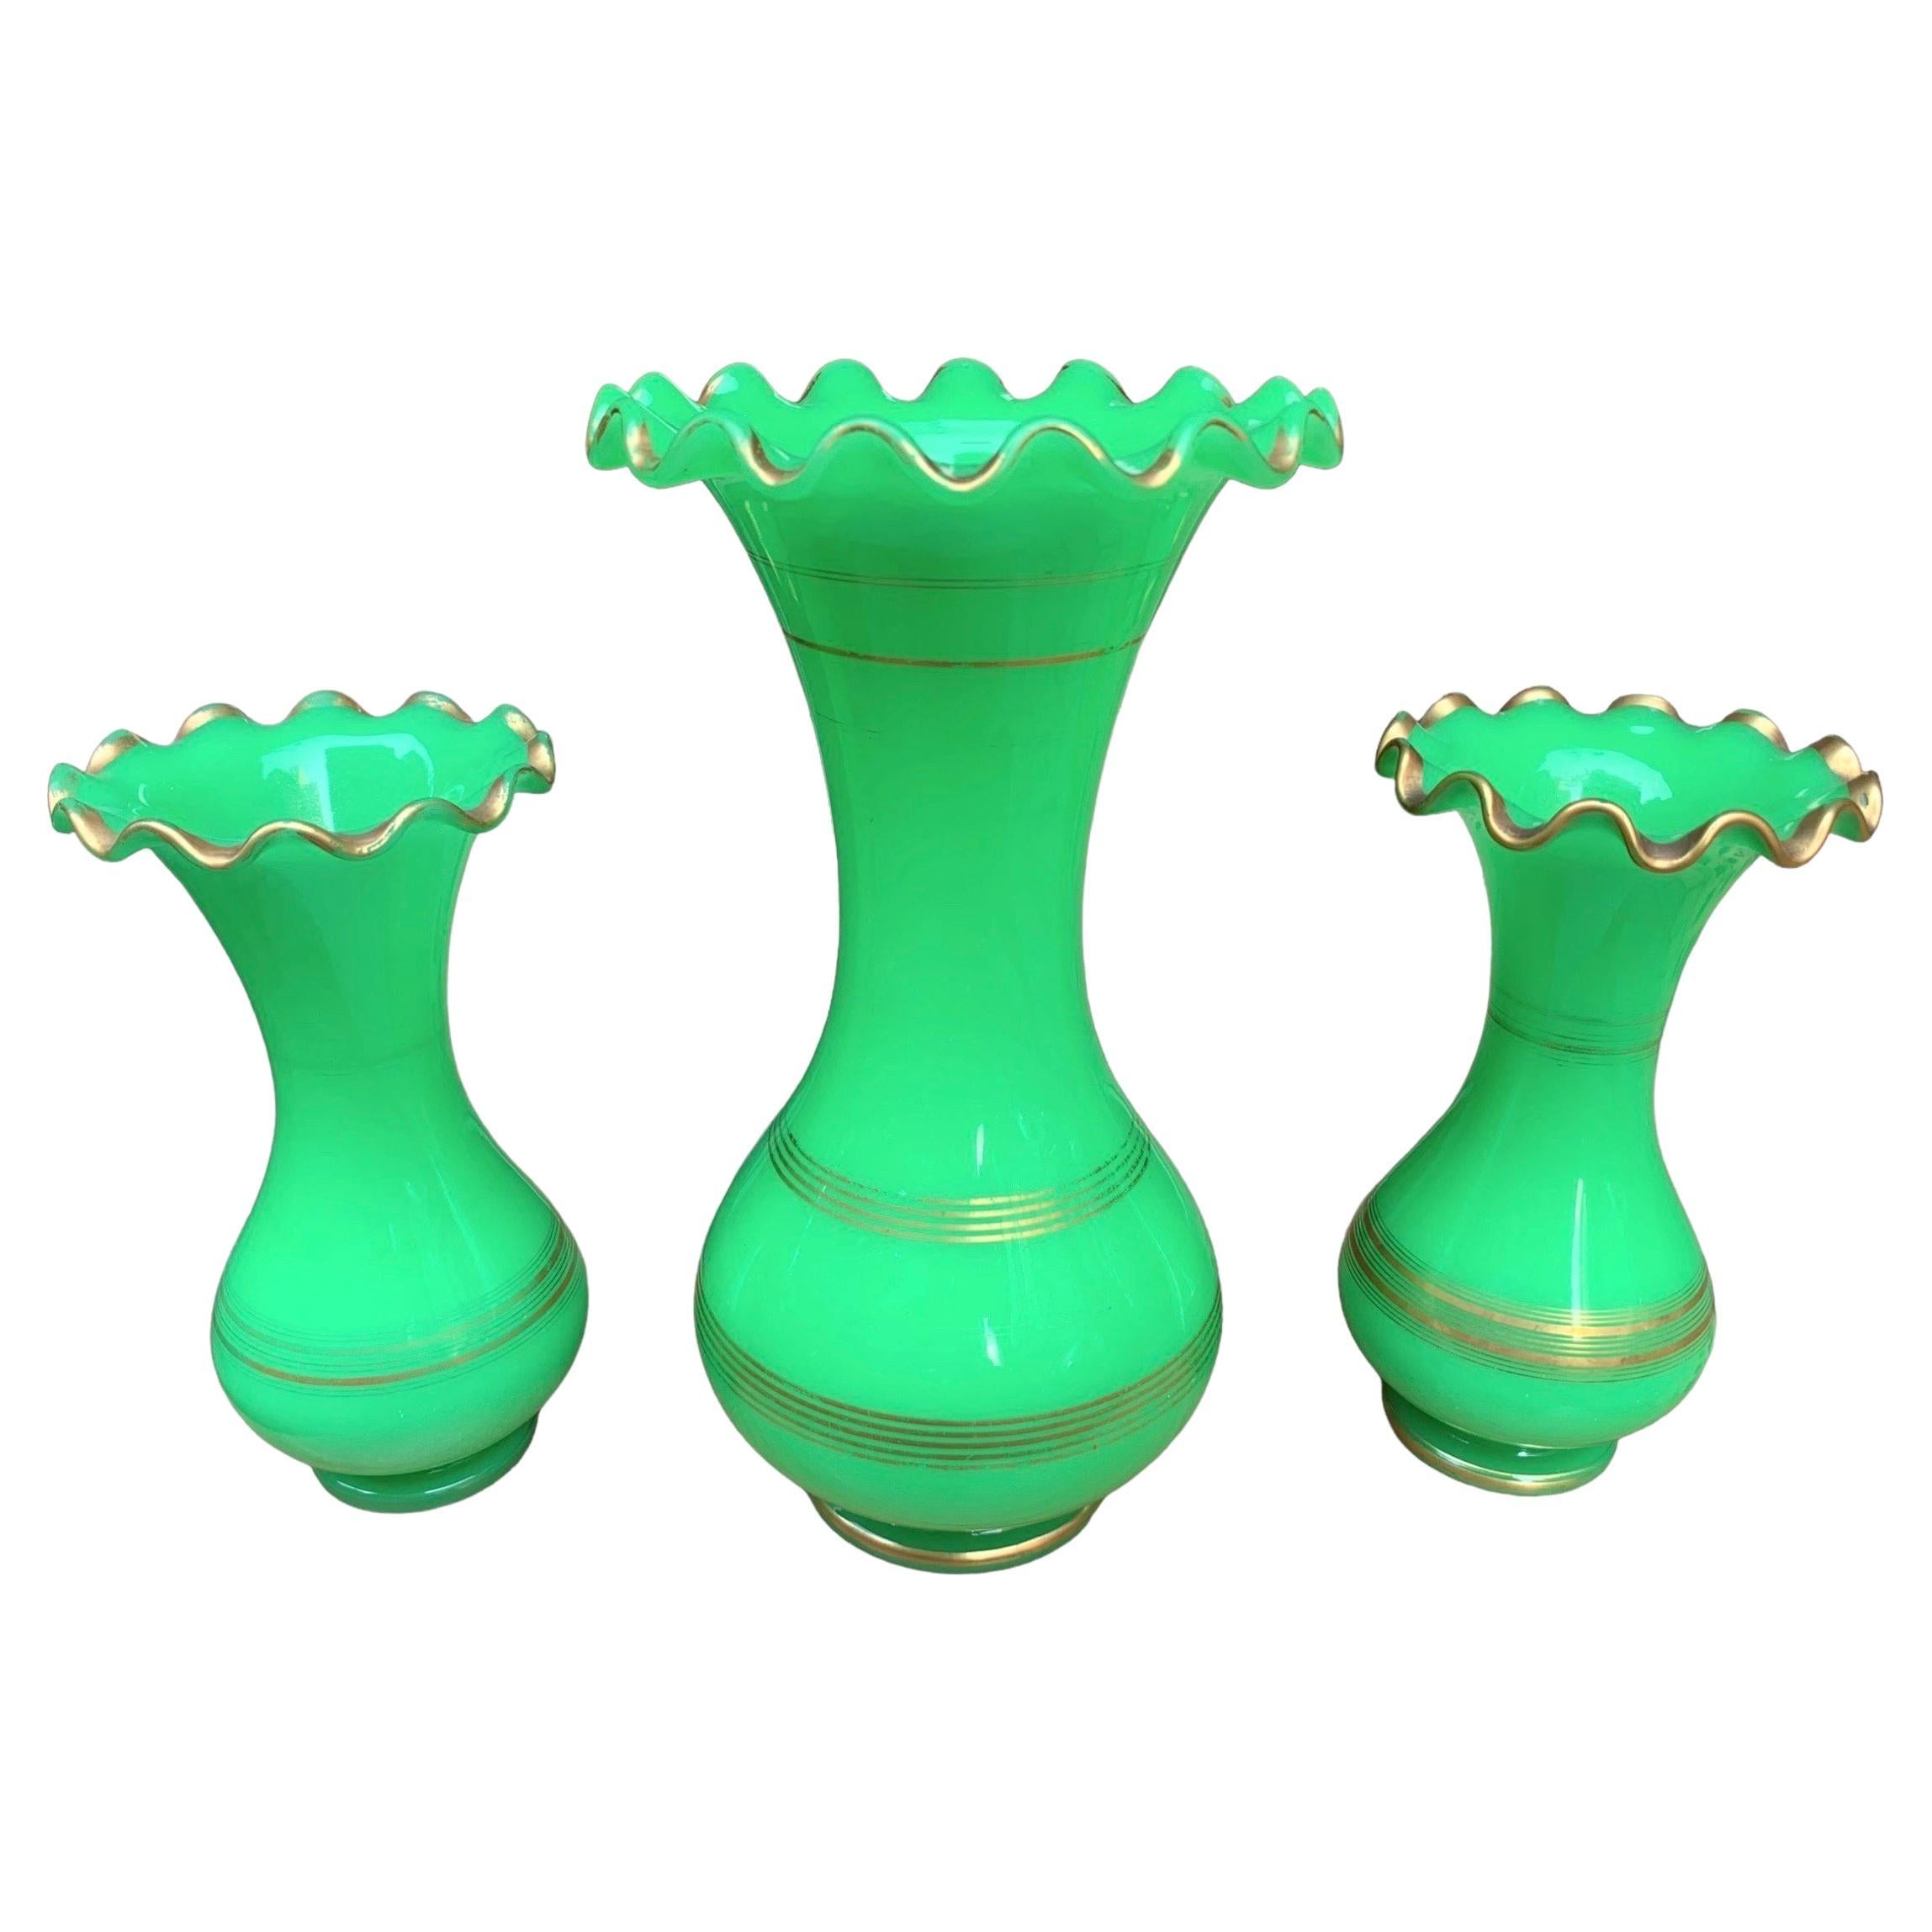 A set of 3 matching opaline glass vases

Beautiful green color with gilding highlights decoration and wavy scalloped rims

France, 19th Century

Measures: Large Vase stands 35 cm high
Small Vases 25 cm high.